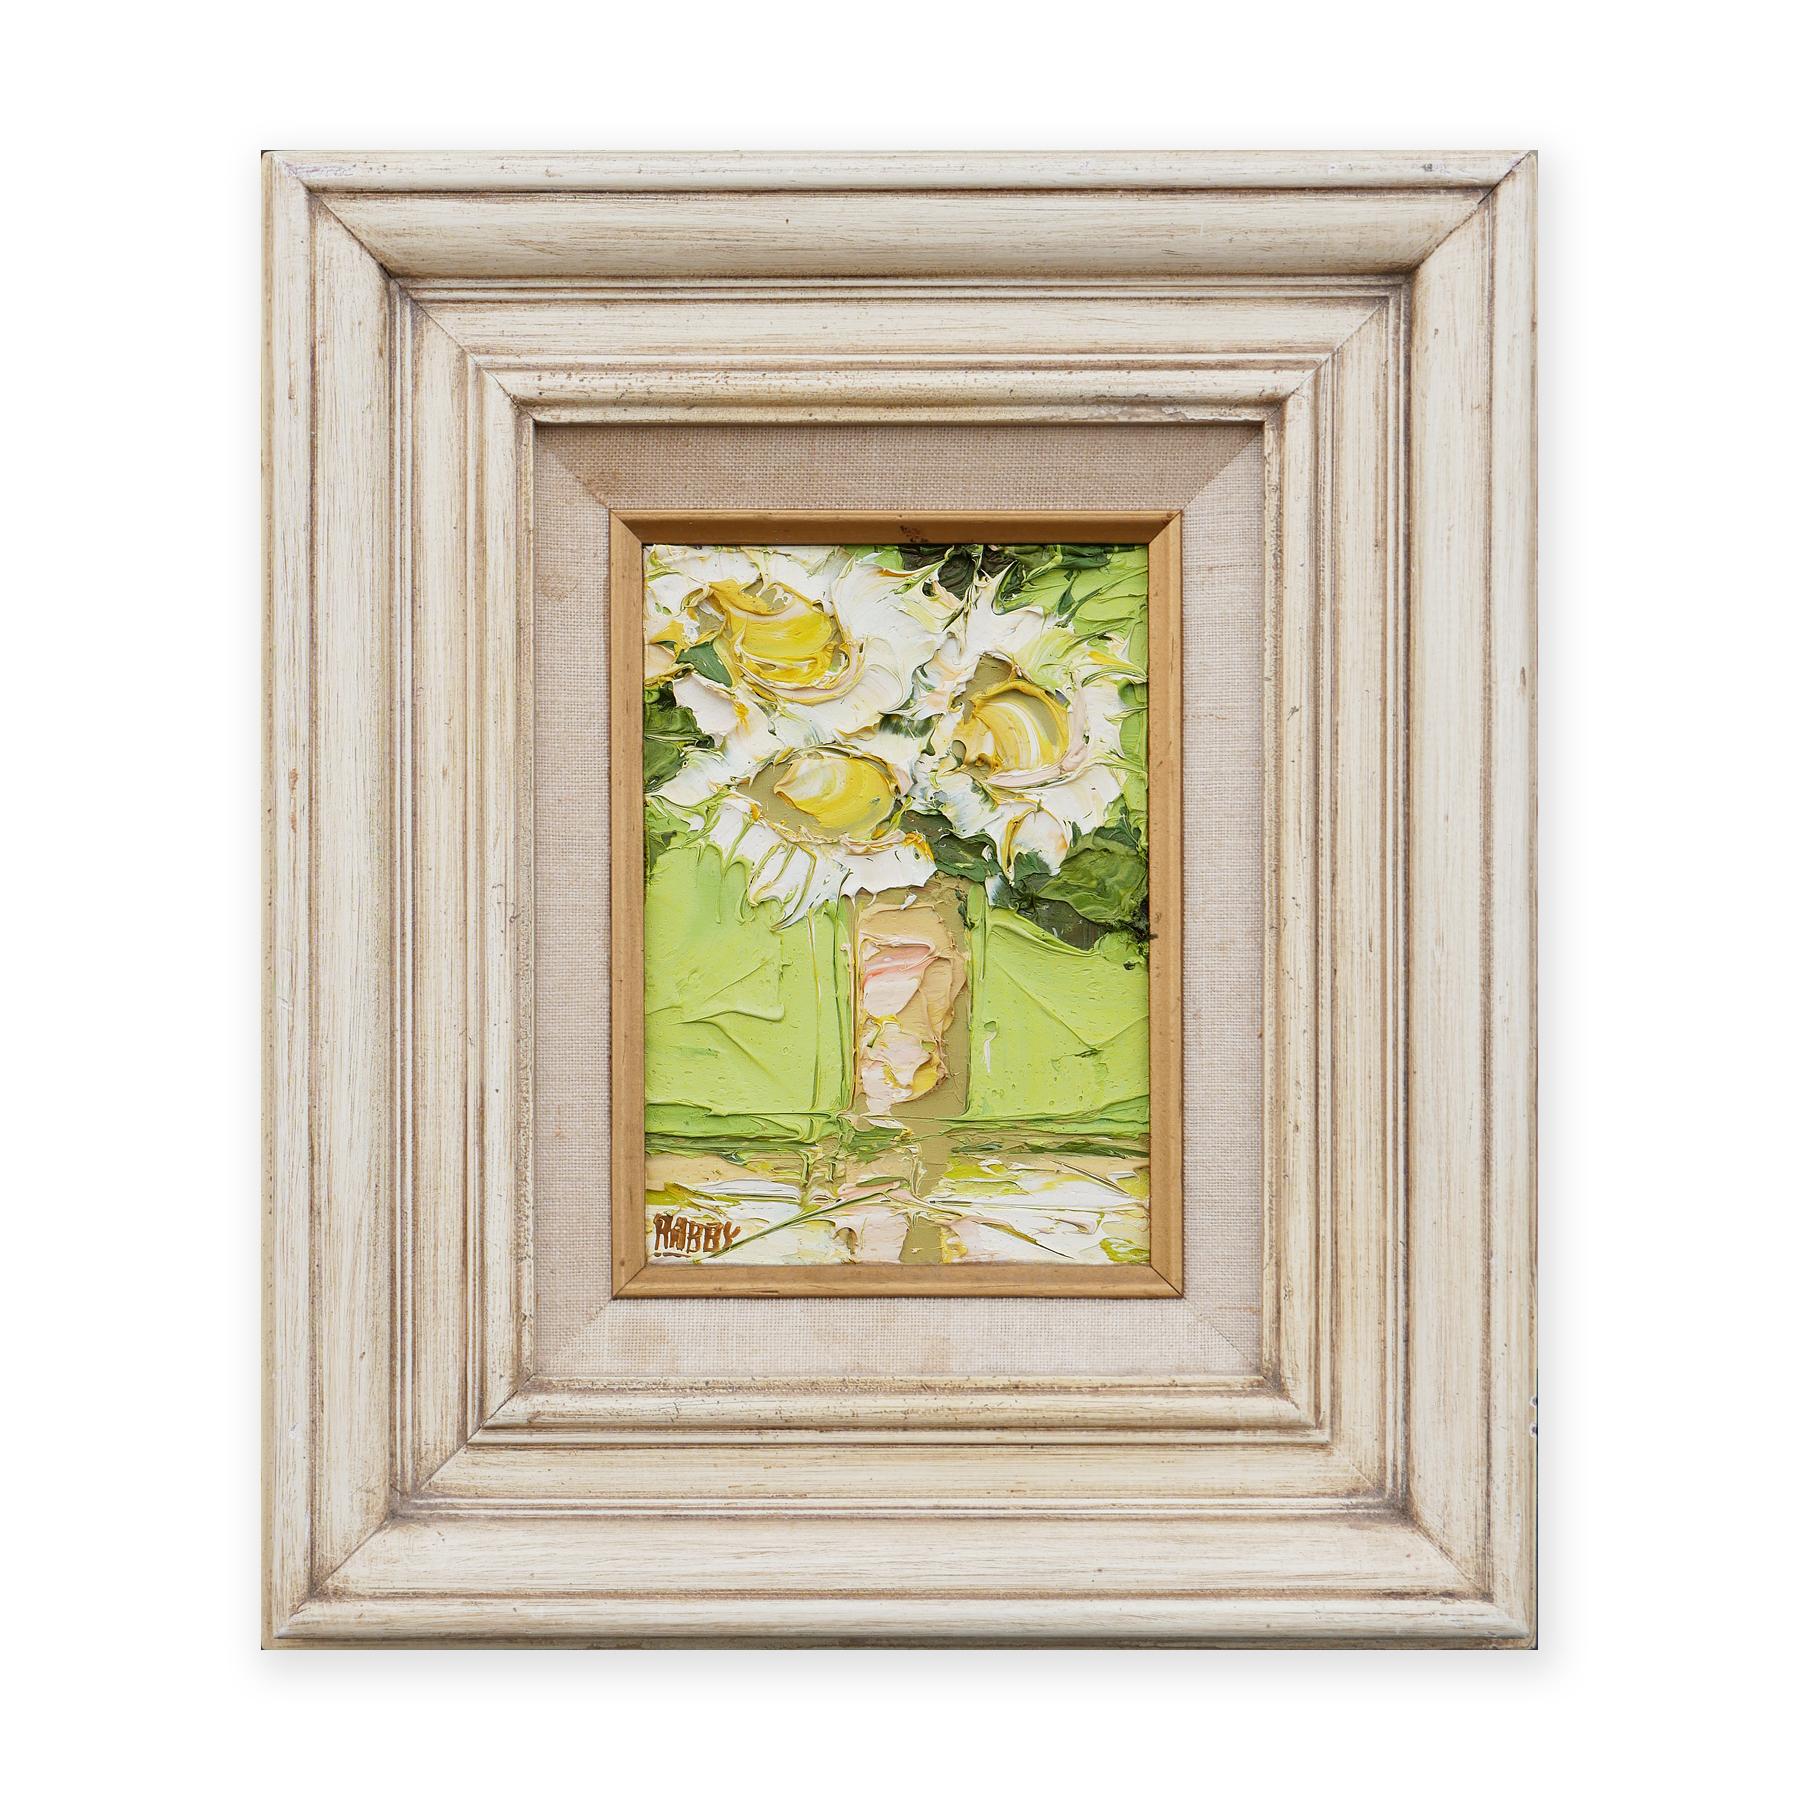 Modern abstract white and yellow floral still life by Houston, TX artist Jim Rabby. The work features three white and yellow flowers in a vase rendered in a thick, impasto style, creating a sense of dimension. Signed 